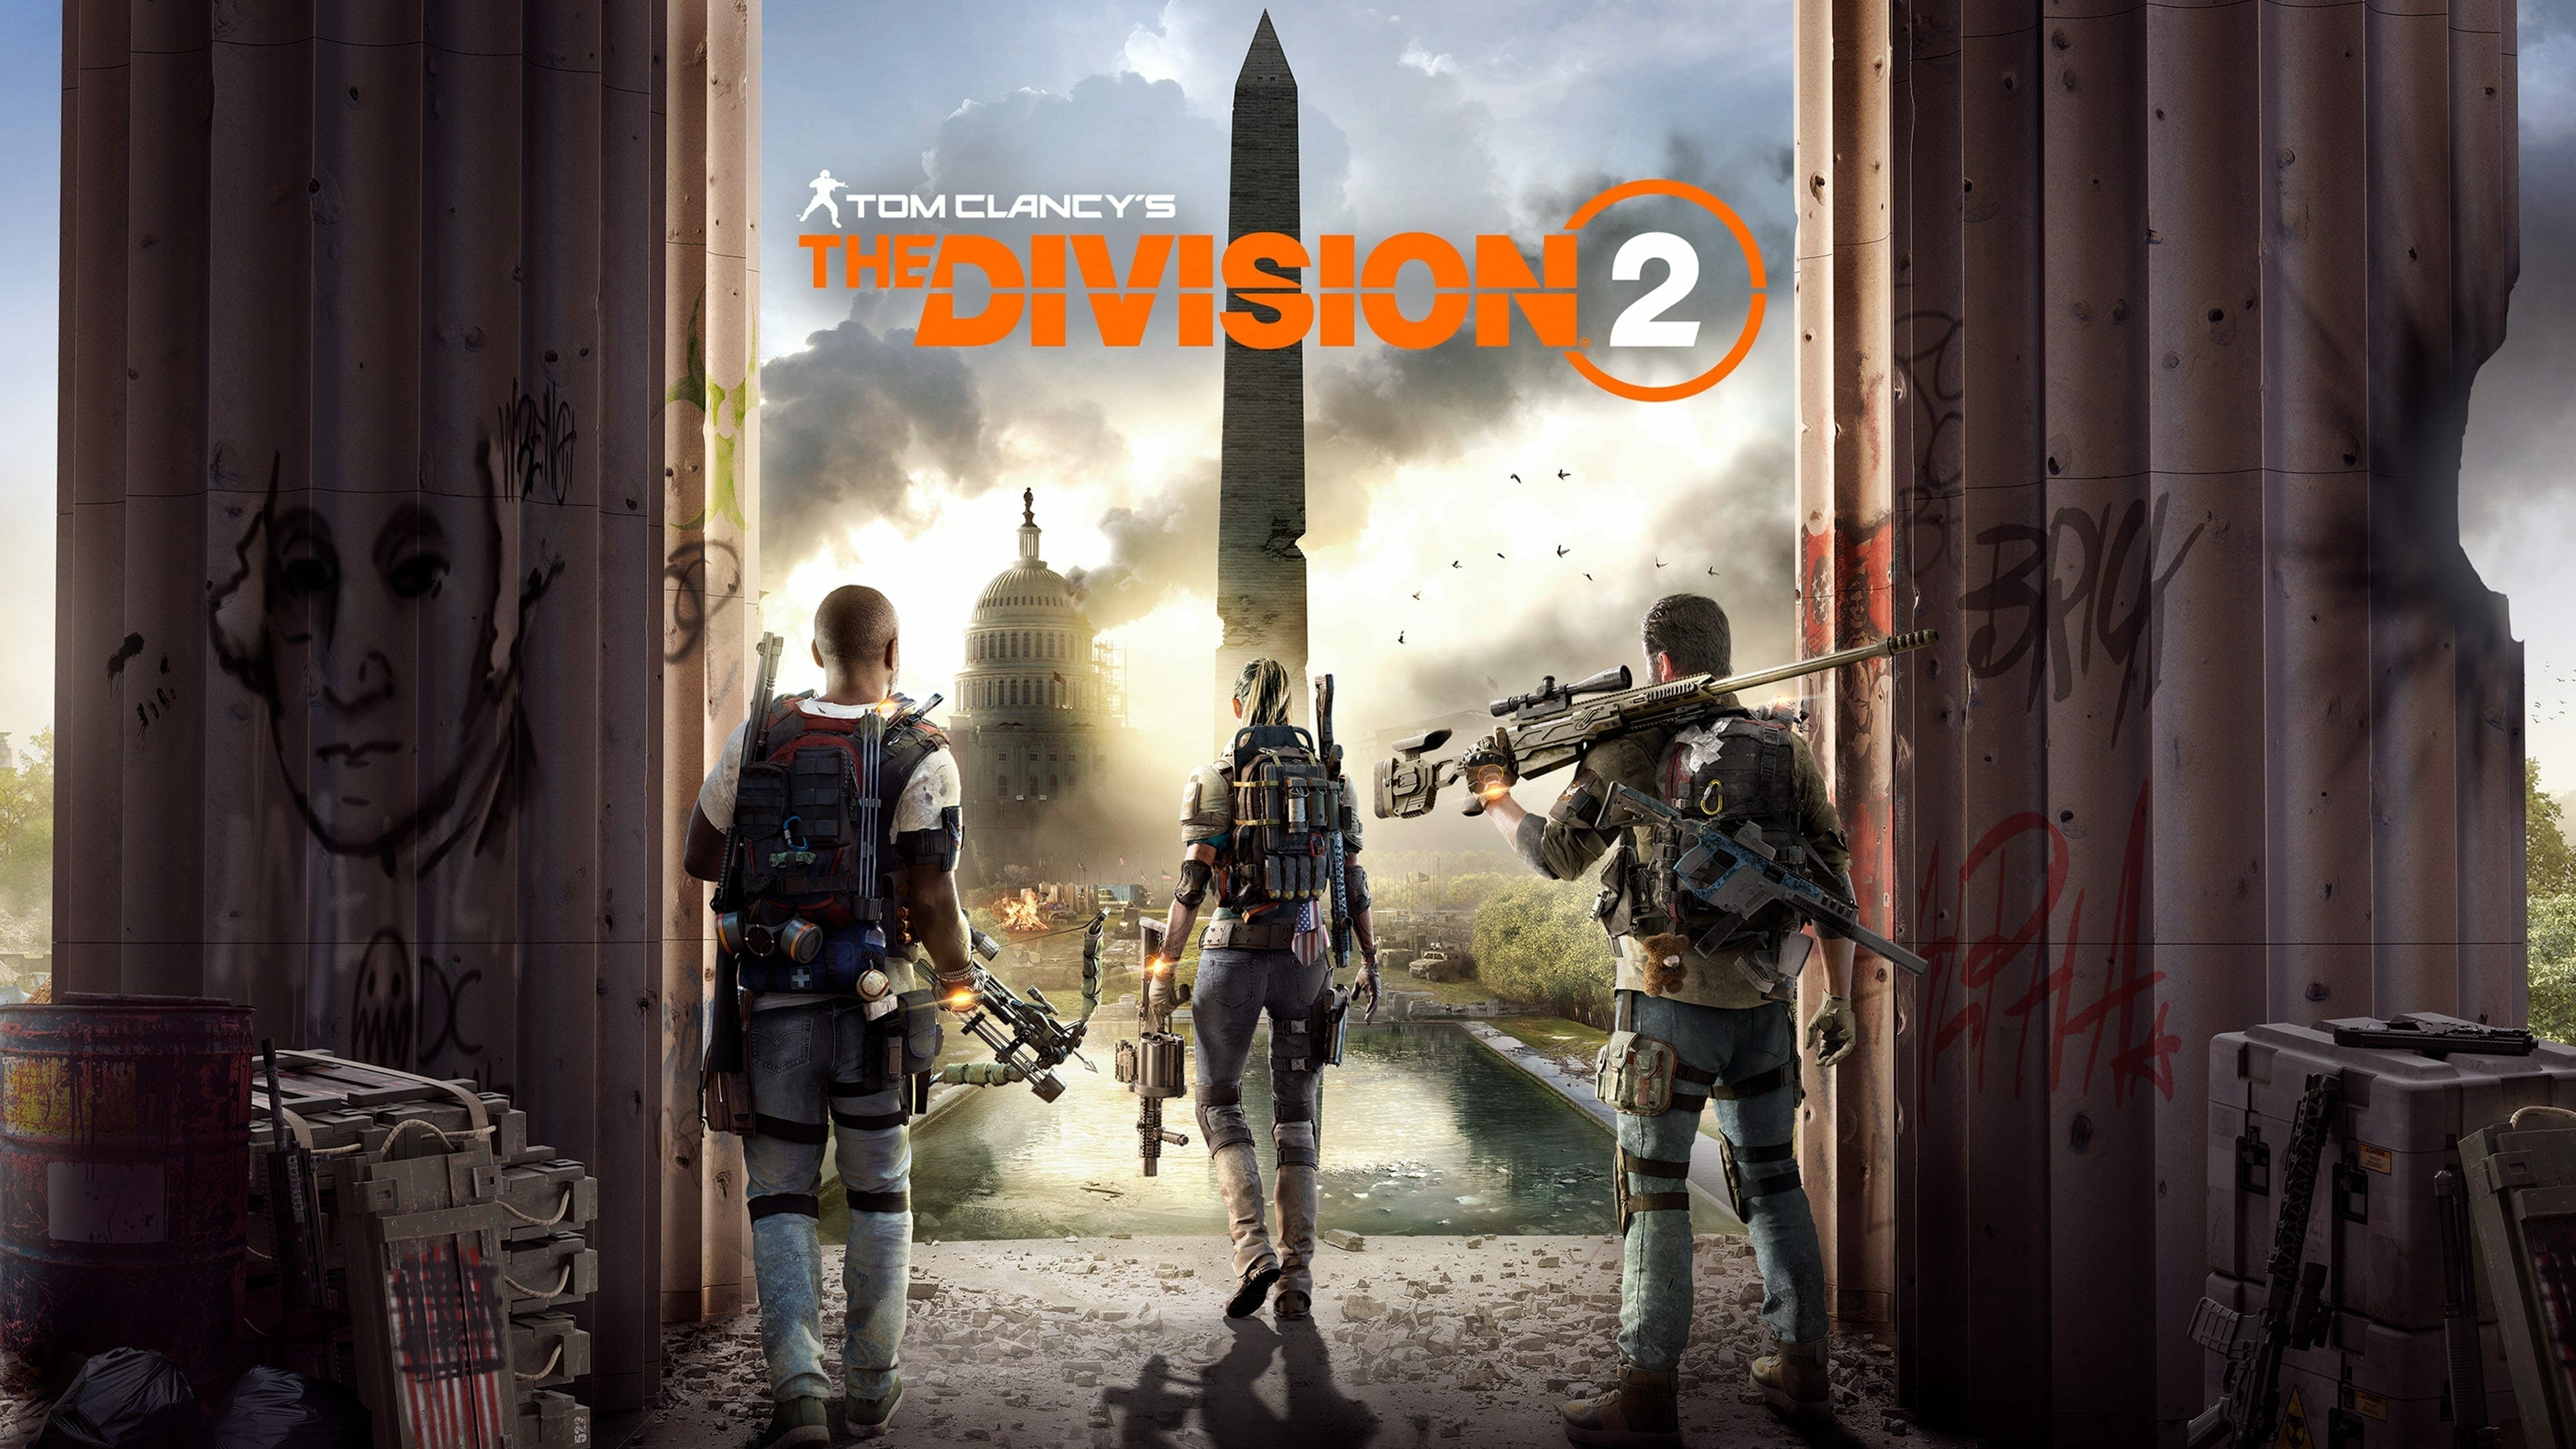 DIVISION 2 File Size